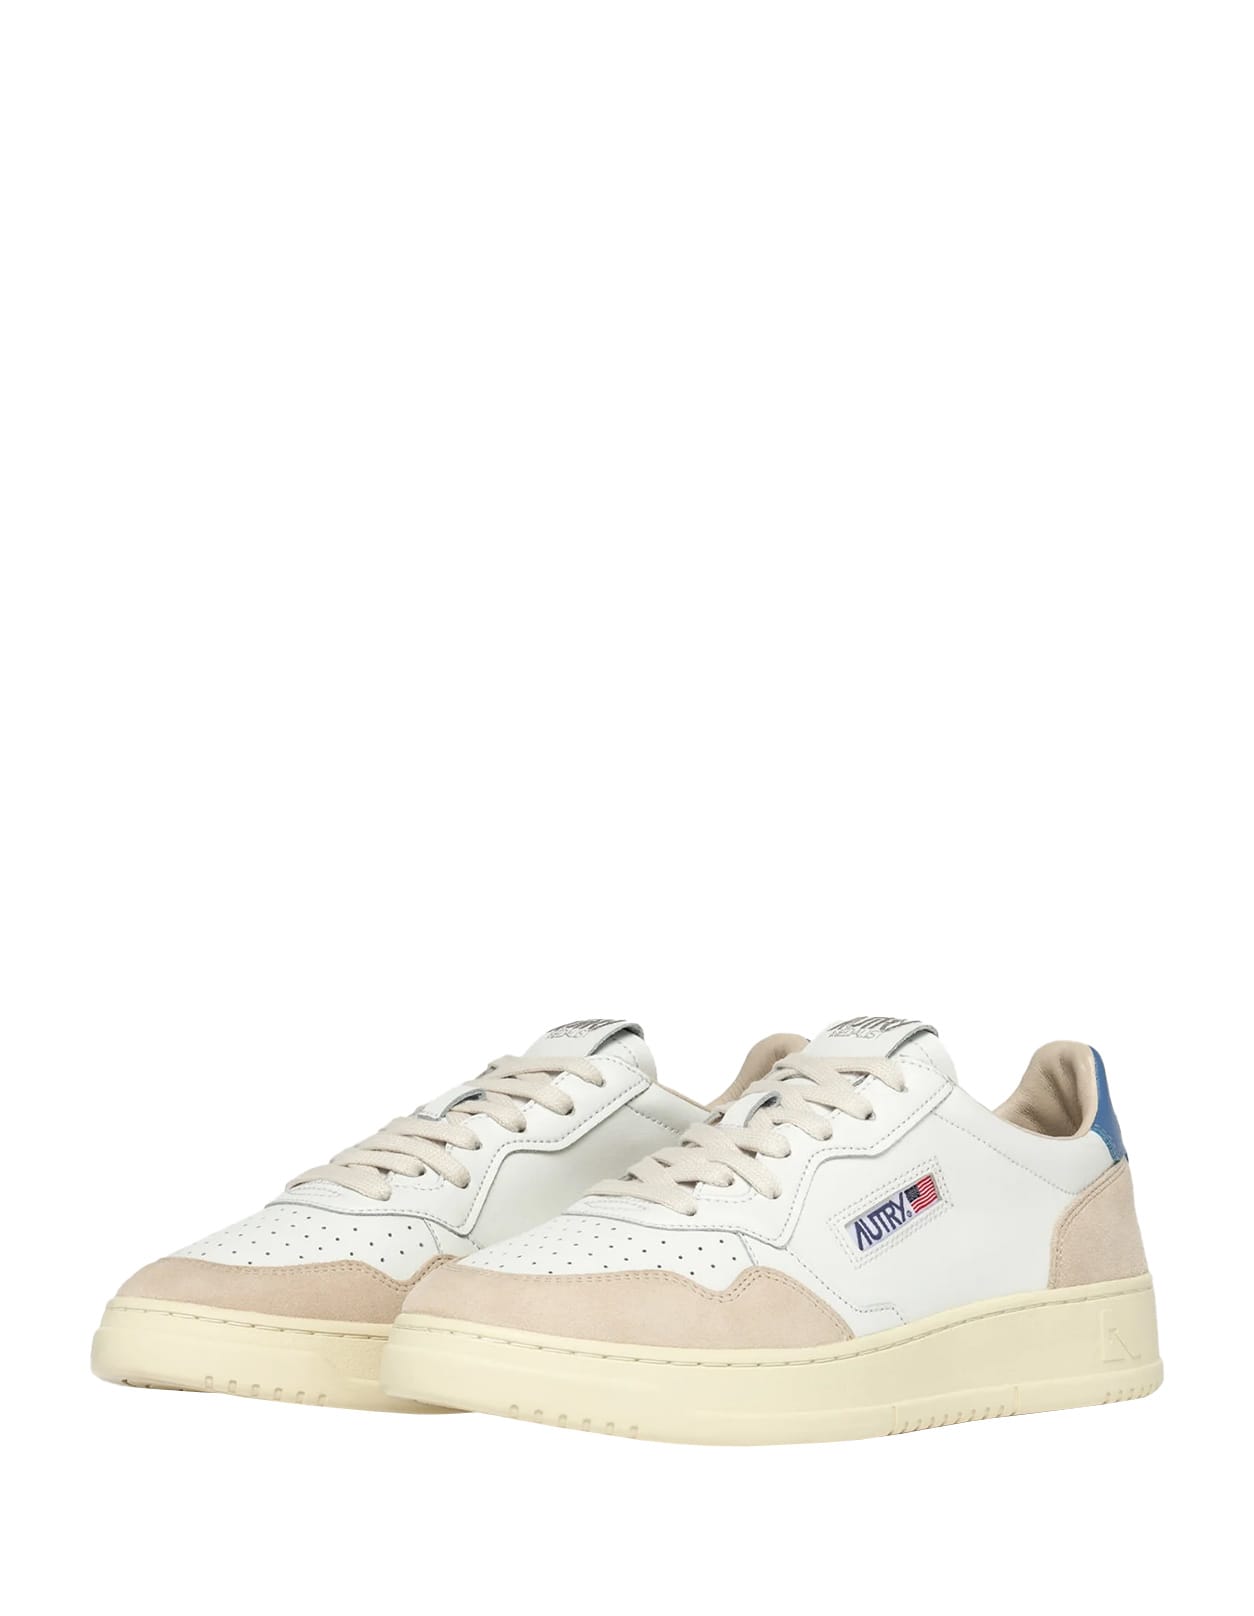 Shop Autry Medalist Low Sneakers In White And Blue Suede And Leather